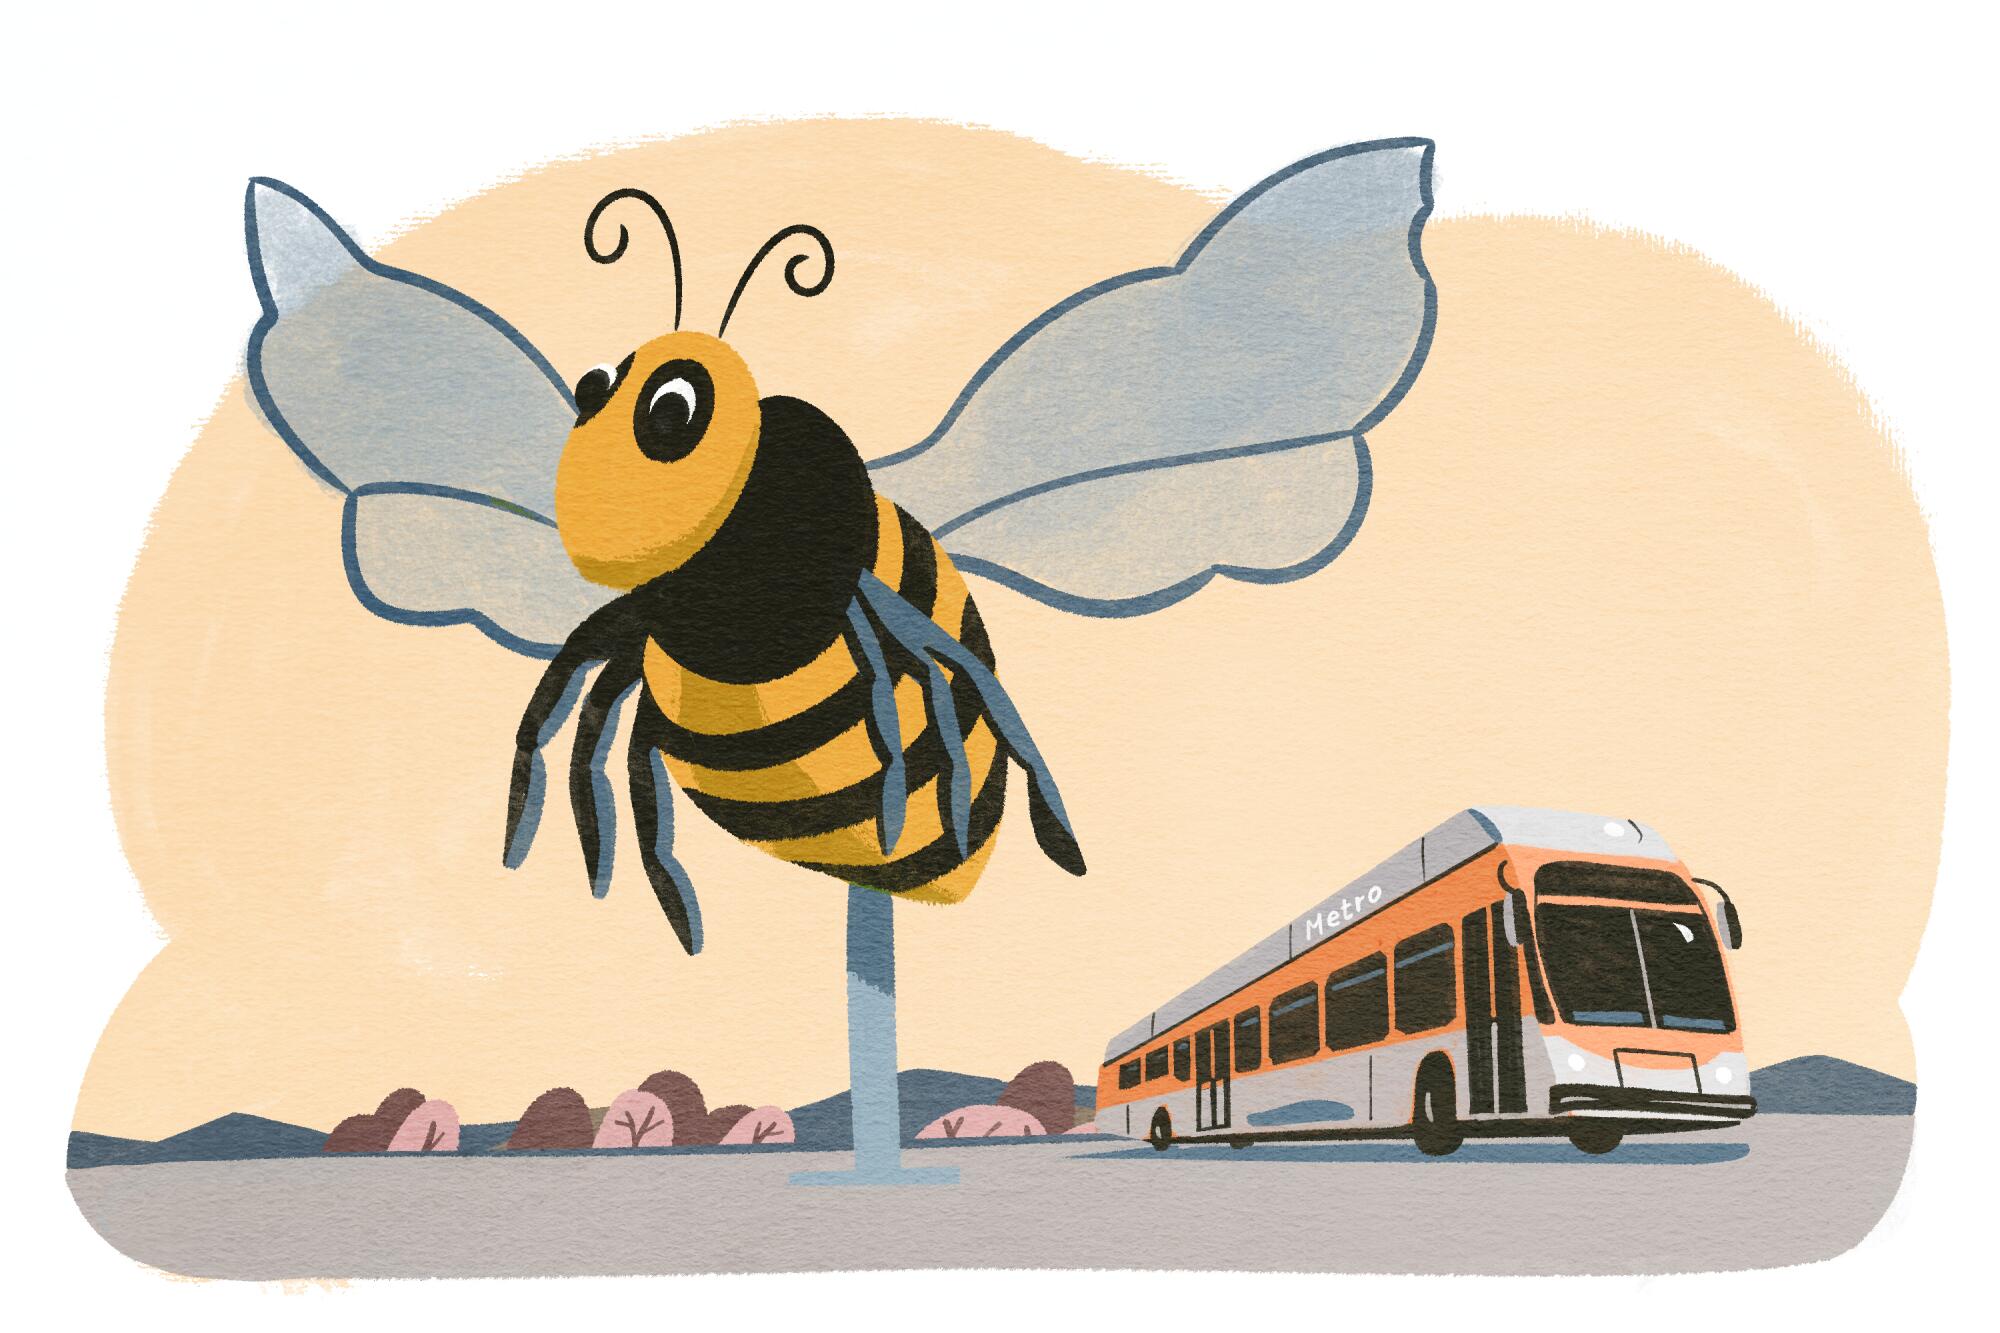 Illustration of a city bus passing by a giant bumblebee sculpture